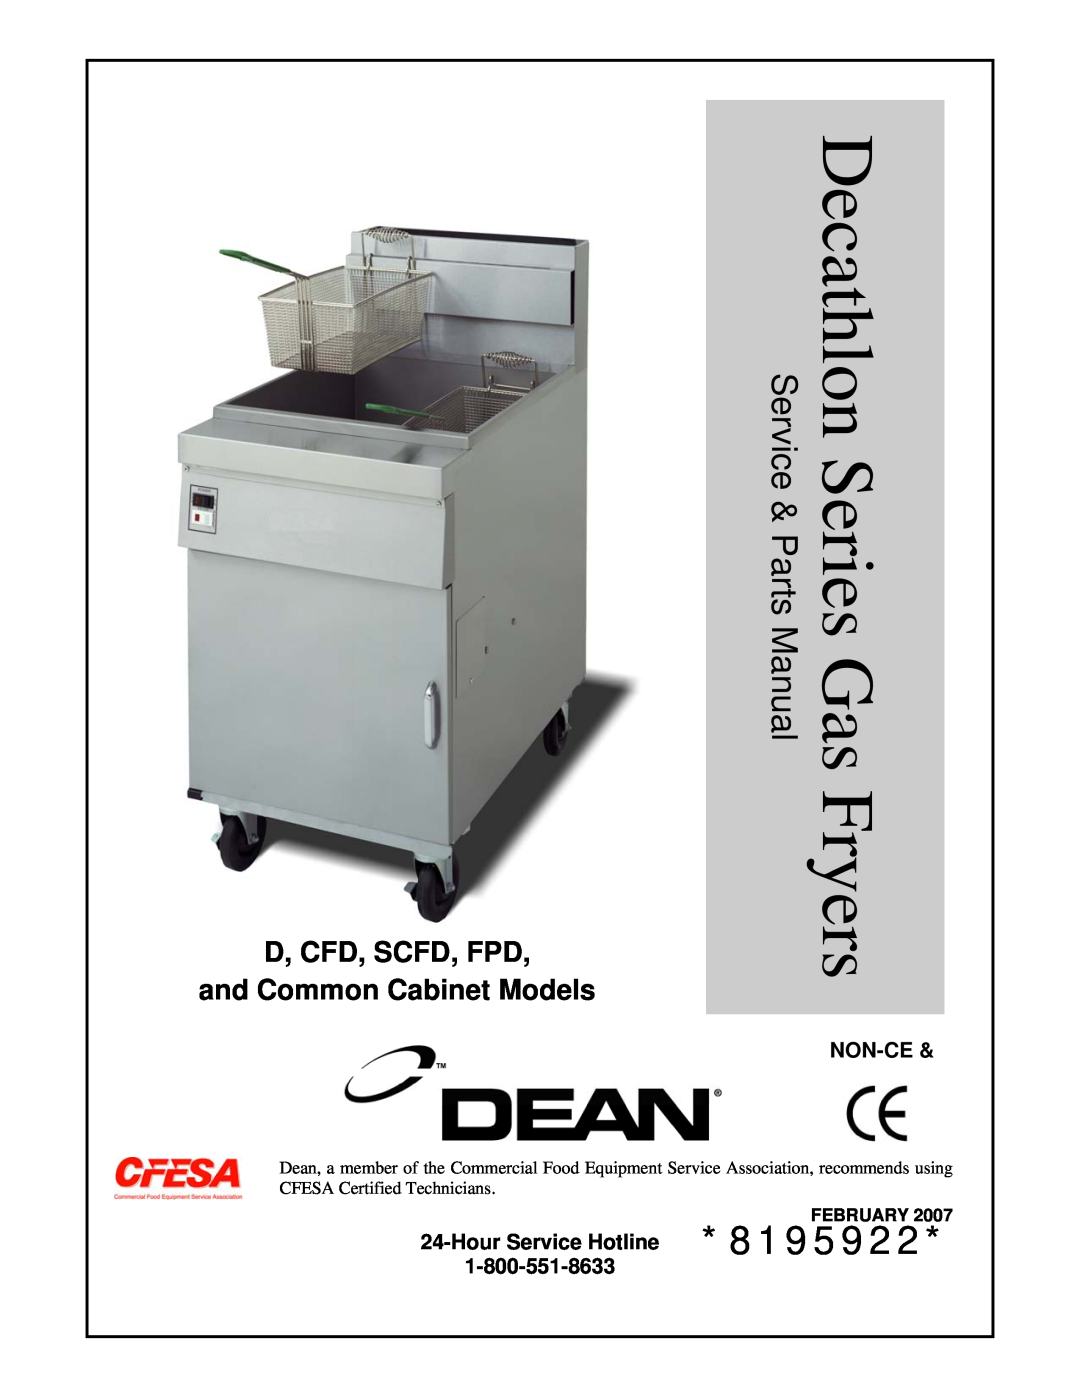 Frymaster manual D, CFD, SCFD, FPD and Common Cabinet Models, Non-Ce, HourService Hotline, 1-800-551-8633, 8195922 